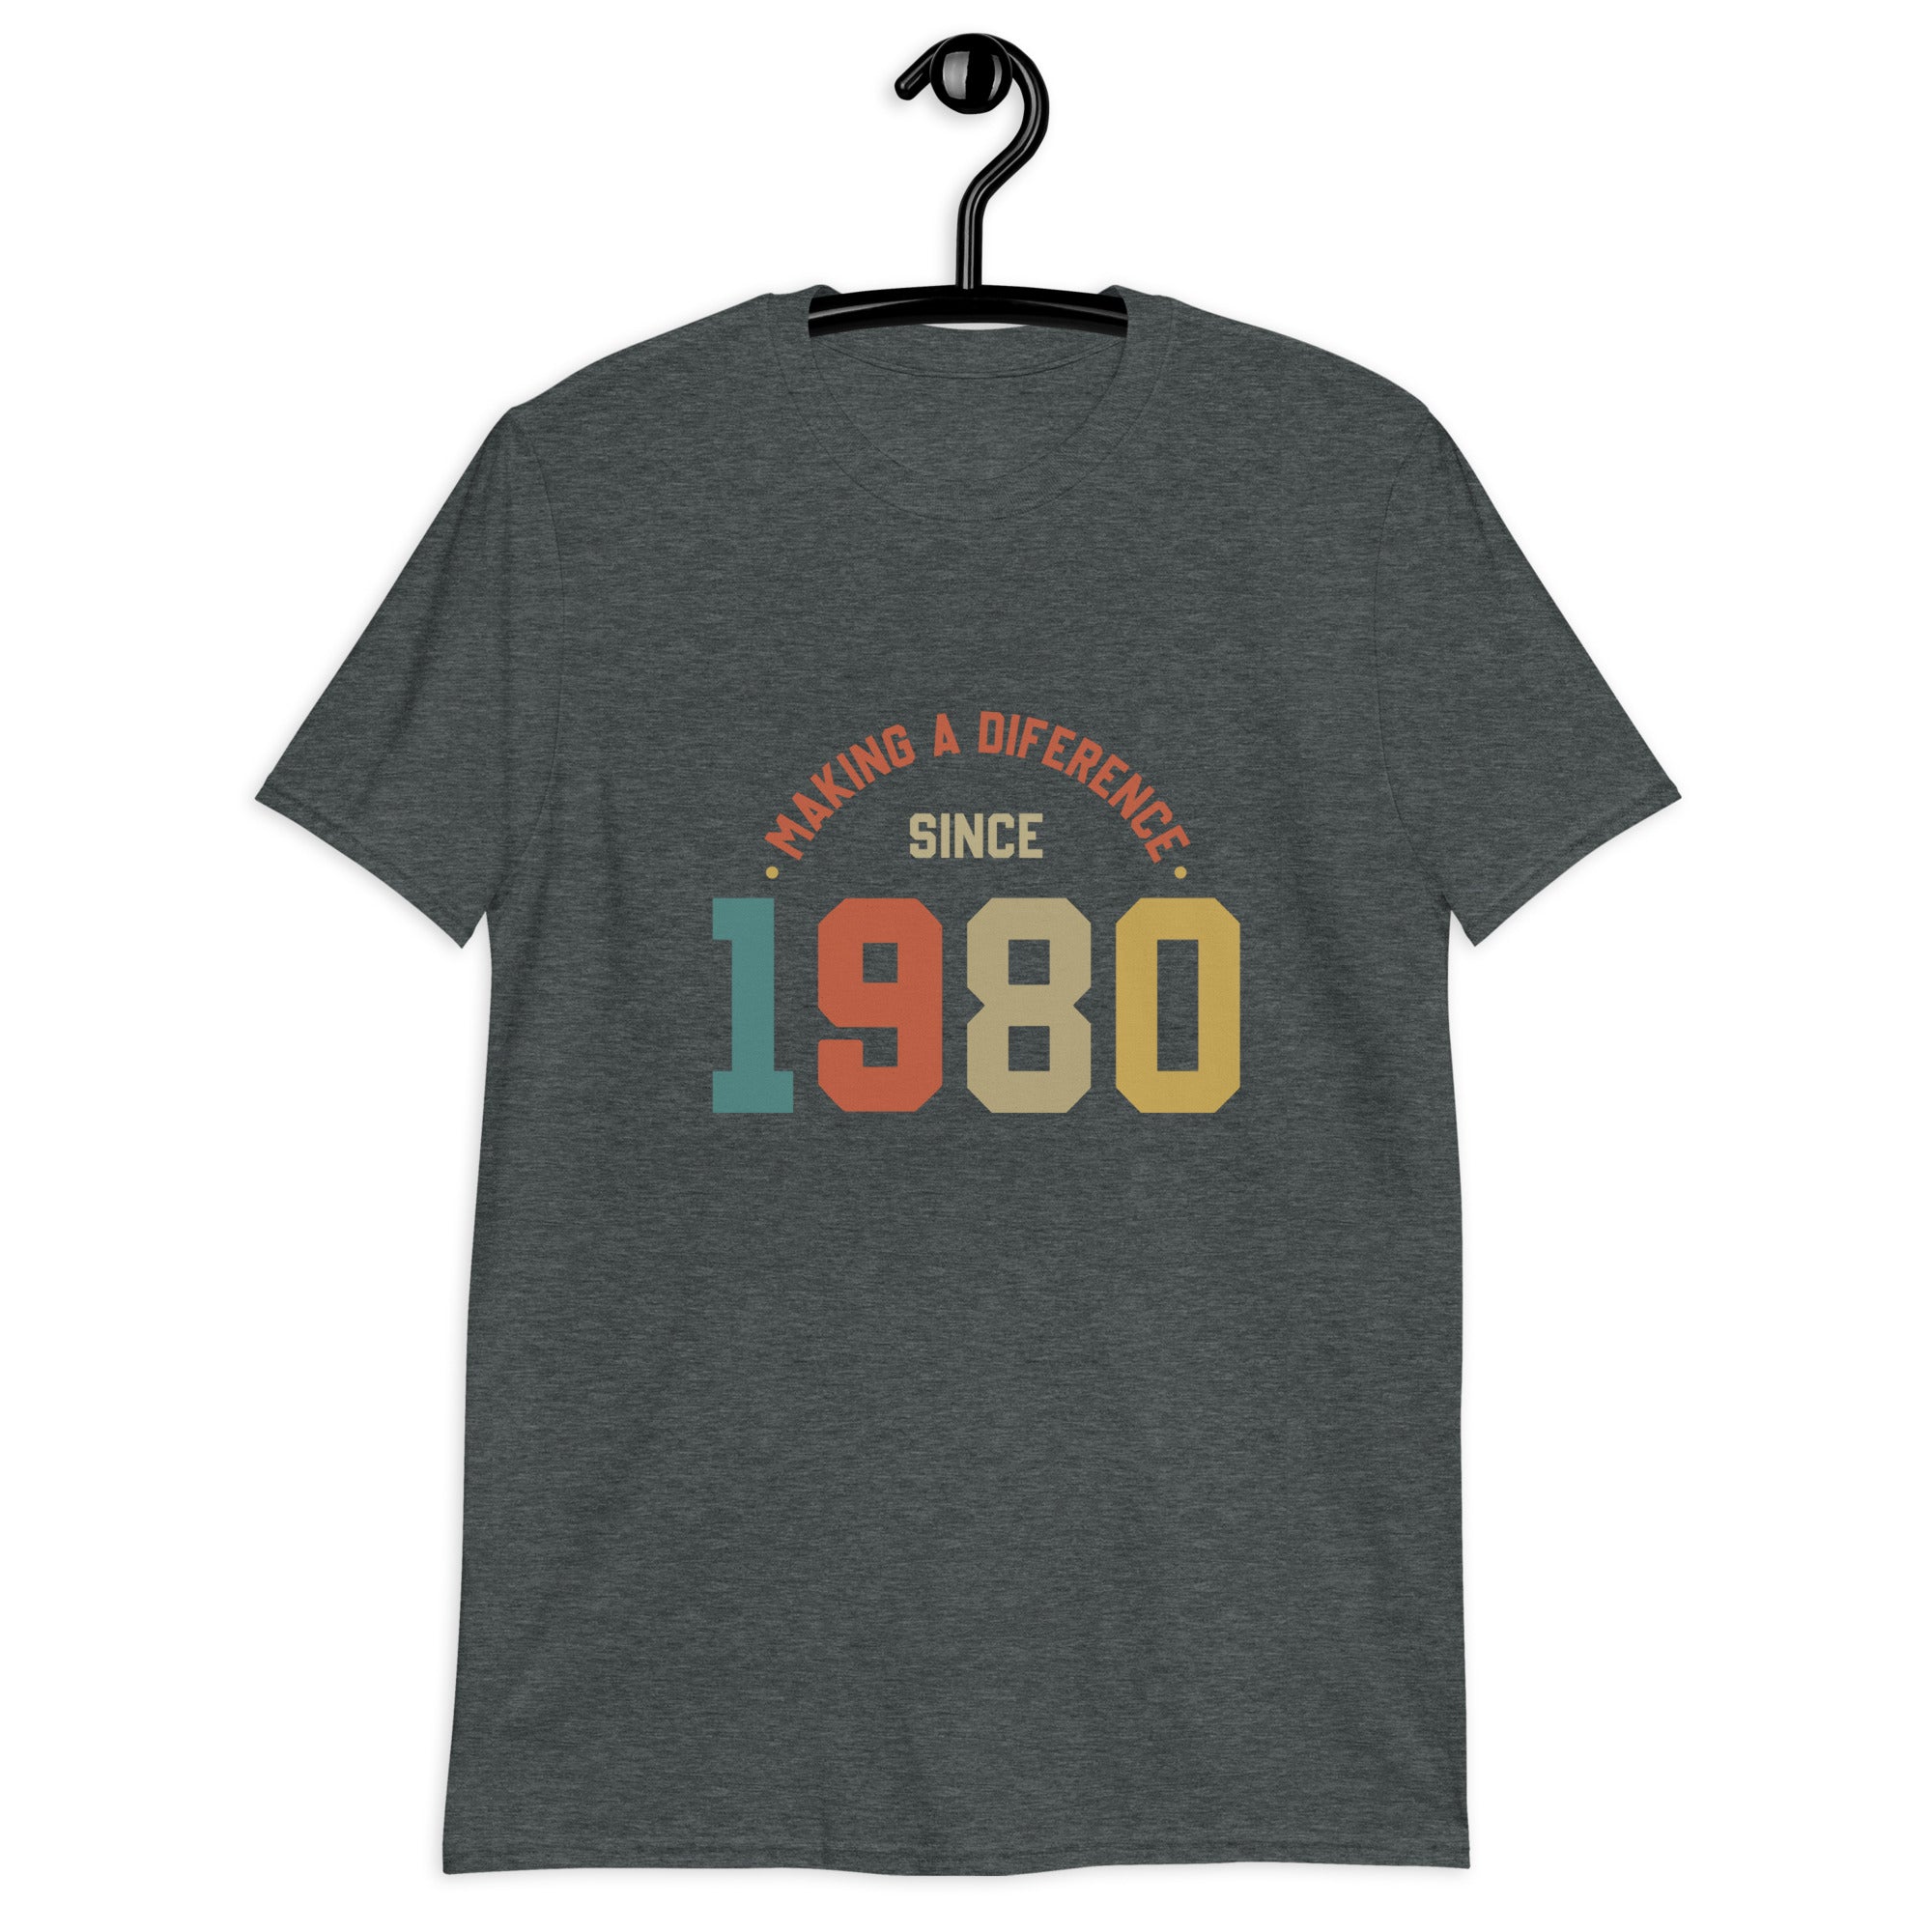 Short-Sleeve Unisex T-Shirt | Making a diference since 1980